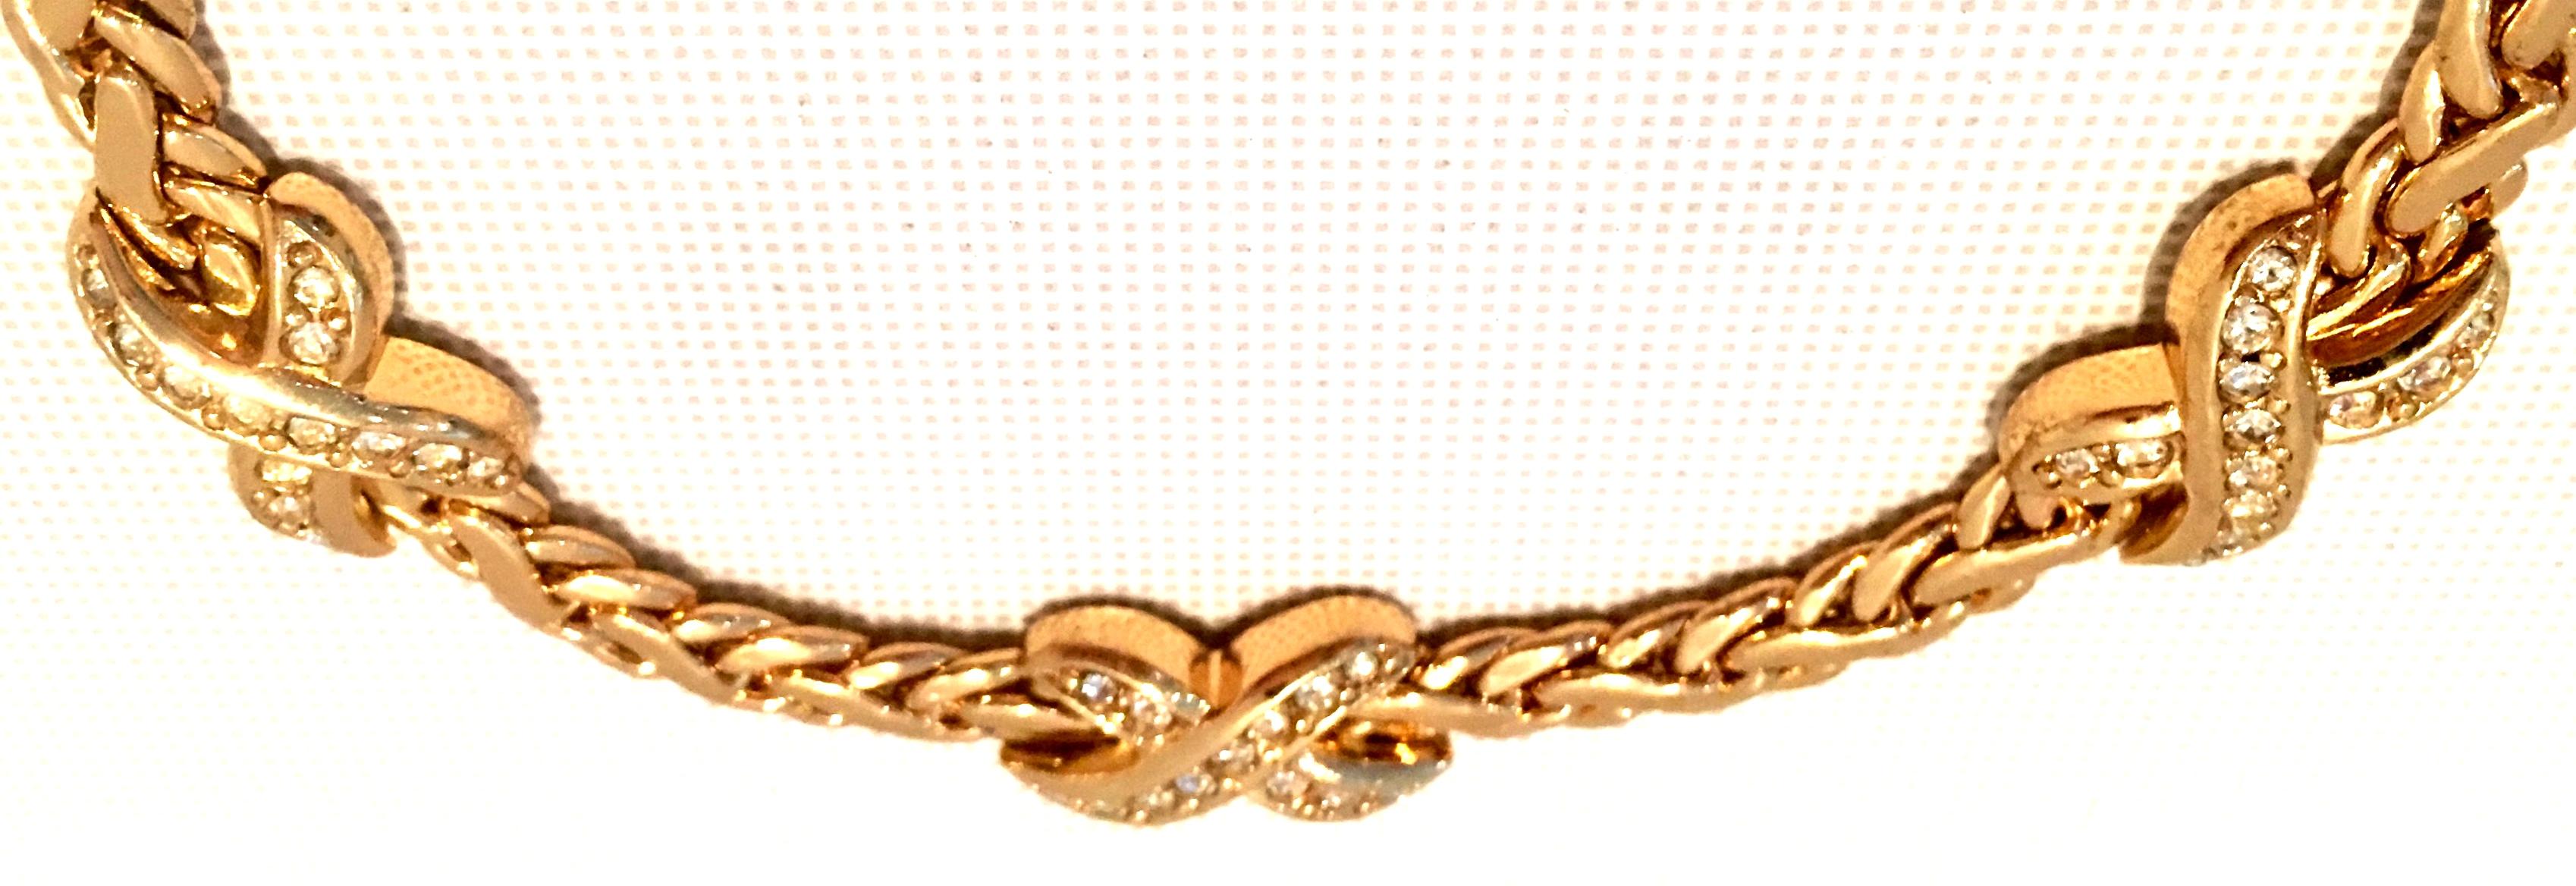 20th Century Gold & Swaorovski Crystal Choker Style Necklace By, Christian Dior 3